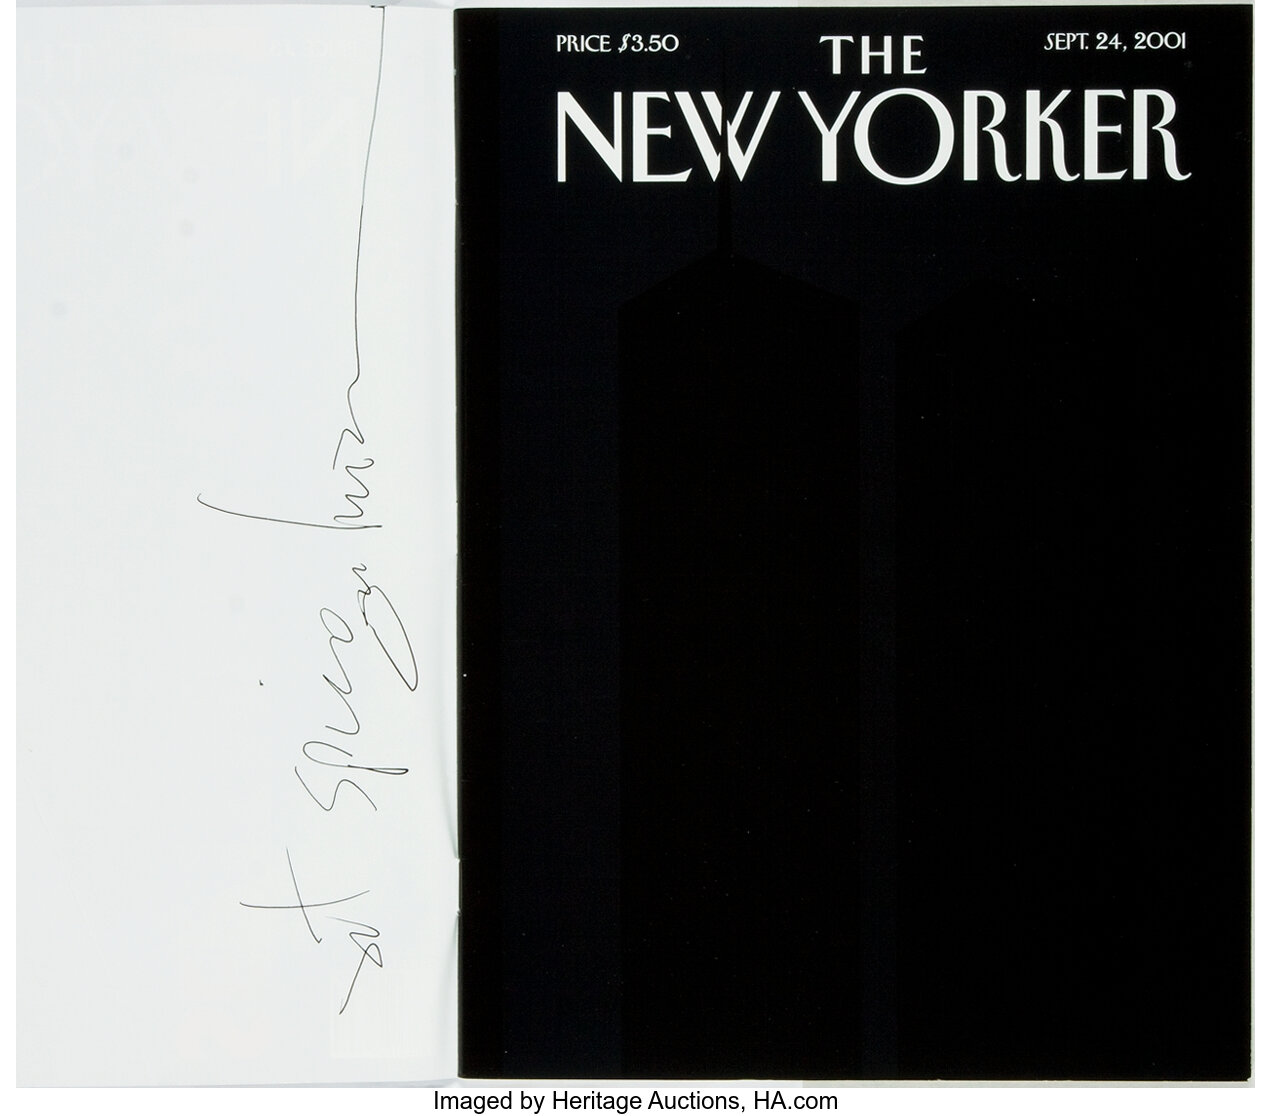 THE NEW YORKER 2001 SEPT. 24, 2001